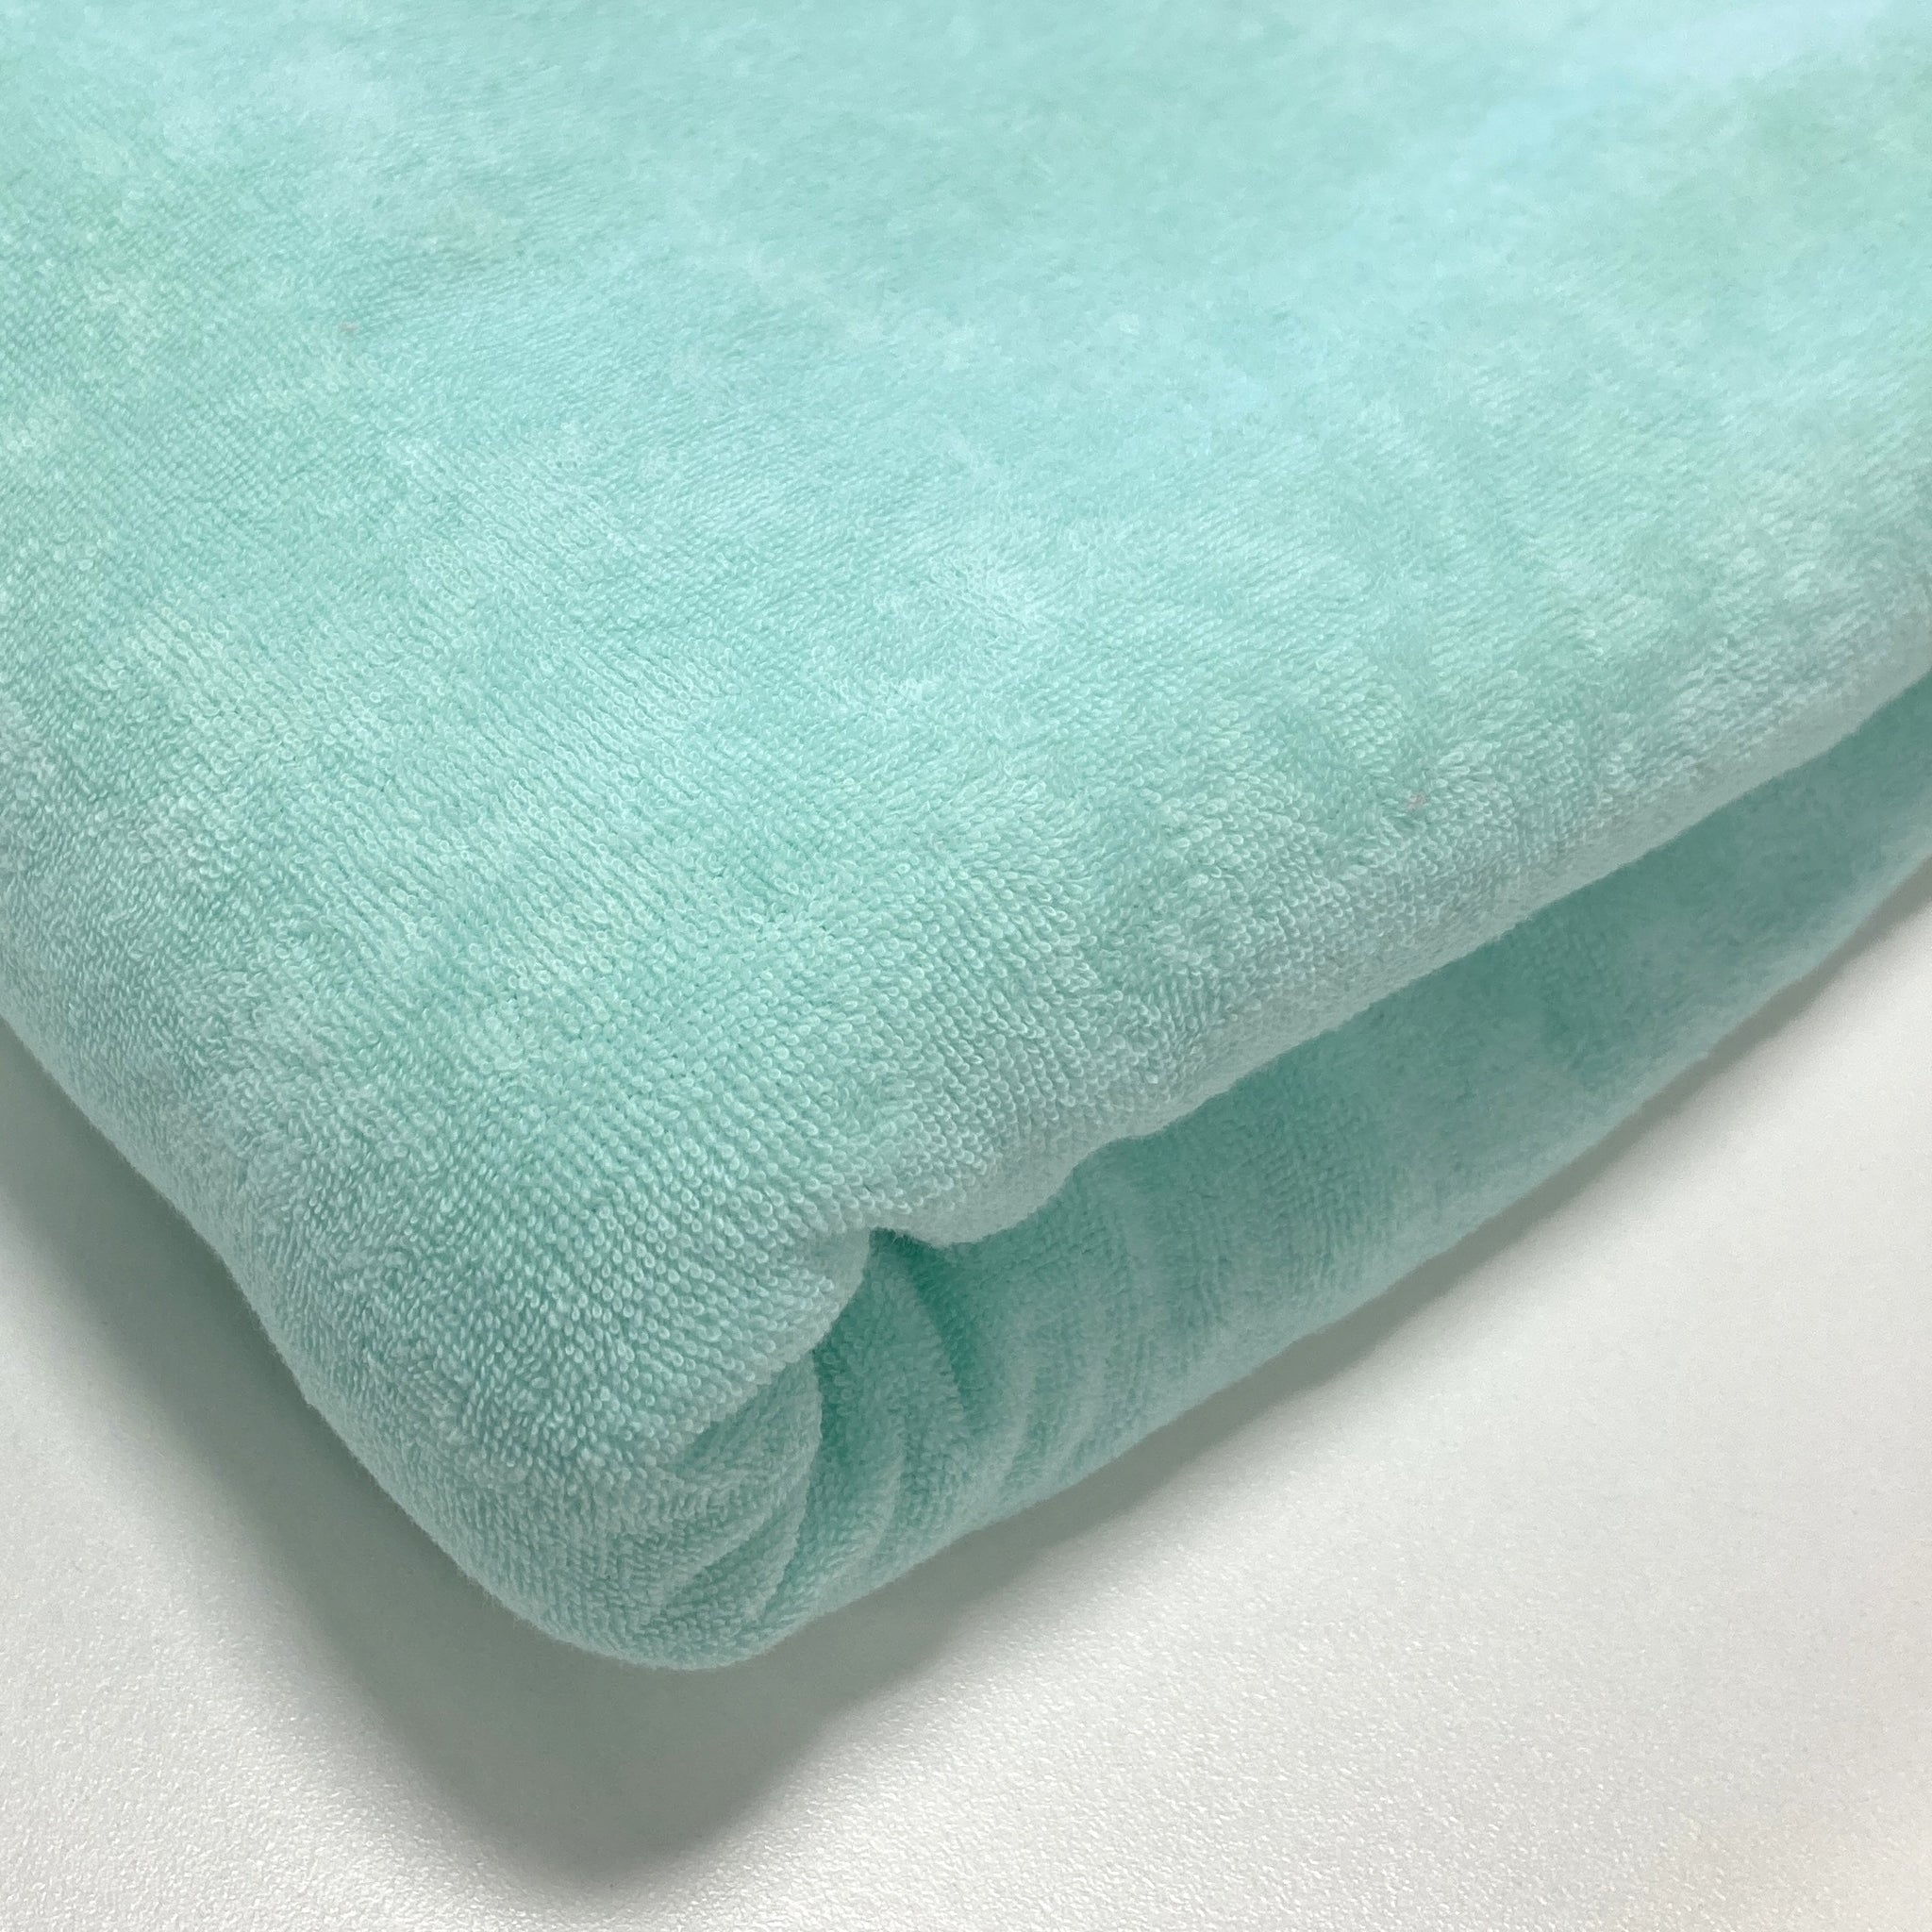 Stretch Minky Fabric Sample – Luxe Fabric Supply